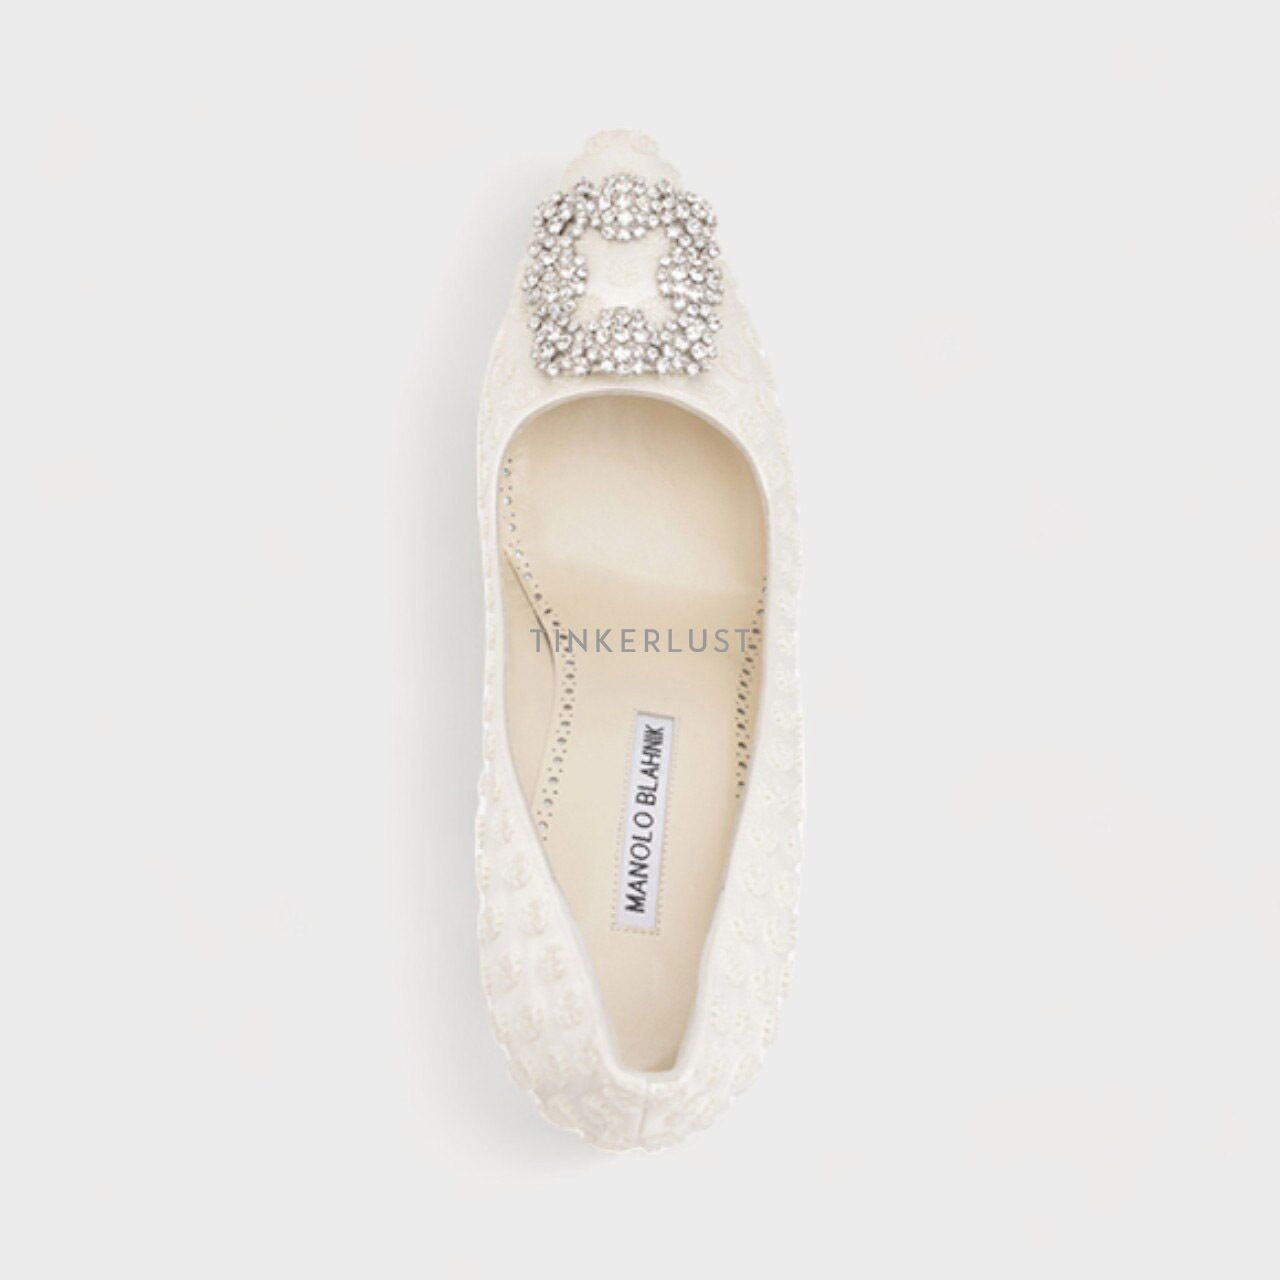 Manolo Blahnik Hangisi Embroidered Pumps 10.5cm in White Satin with White Crystal Heels	